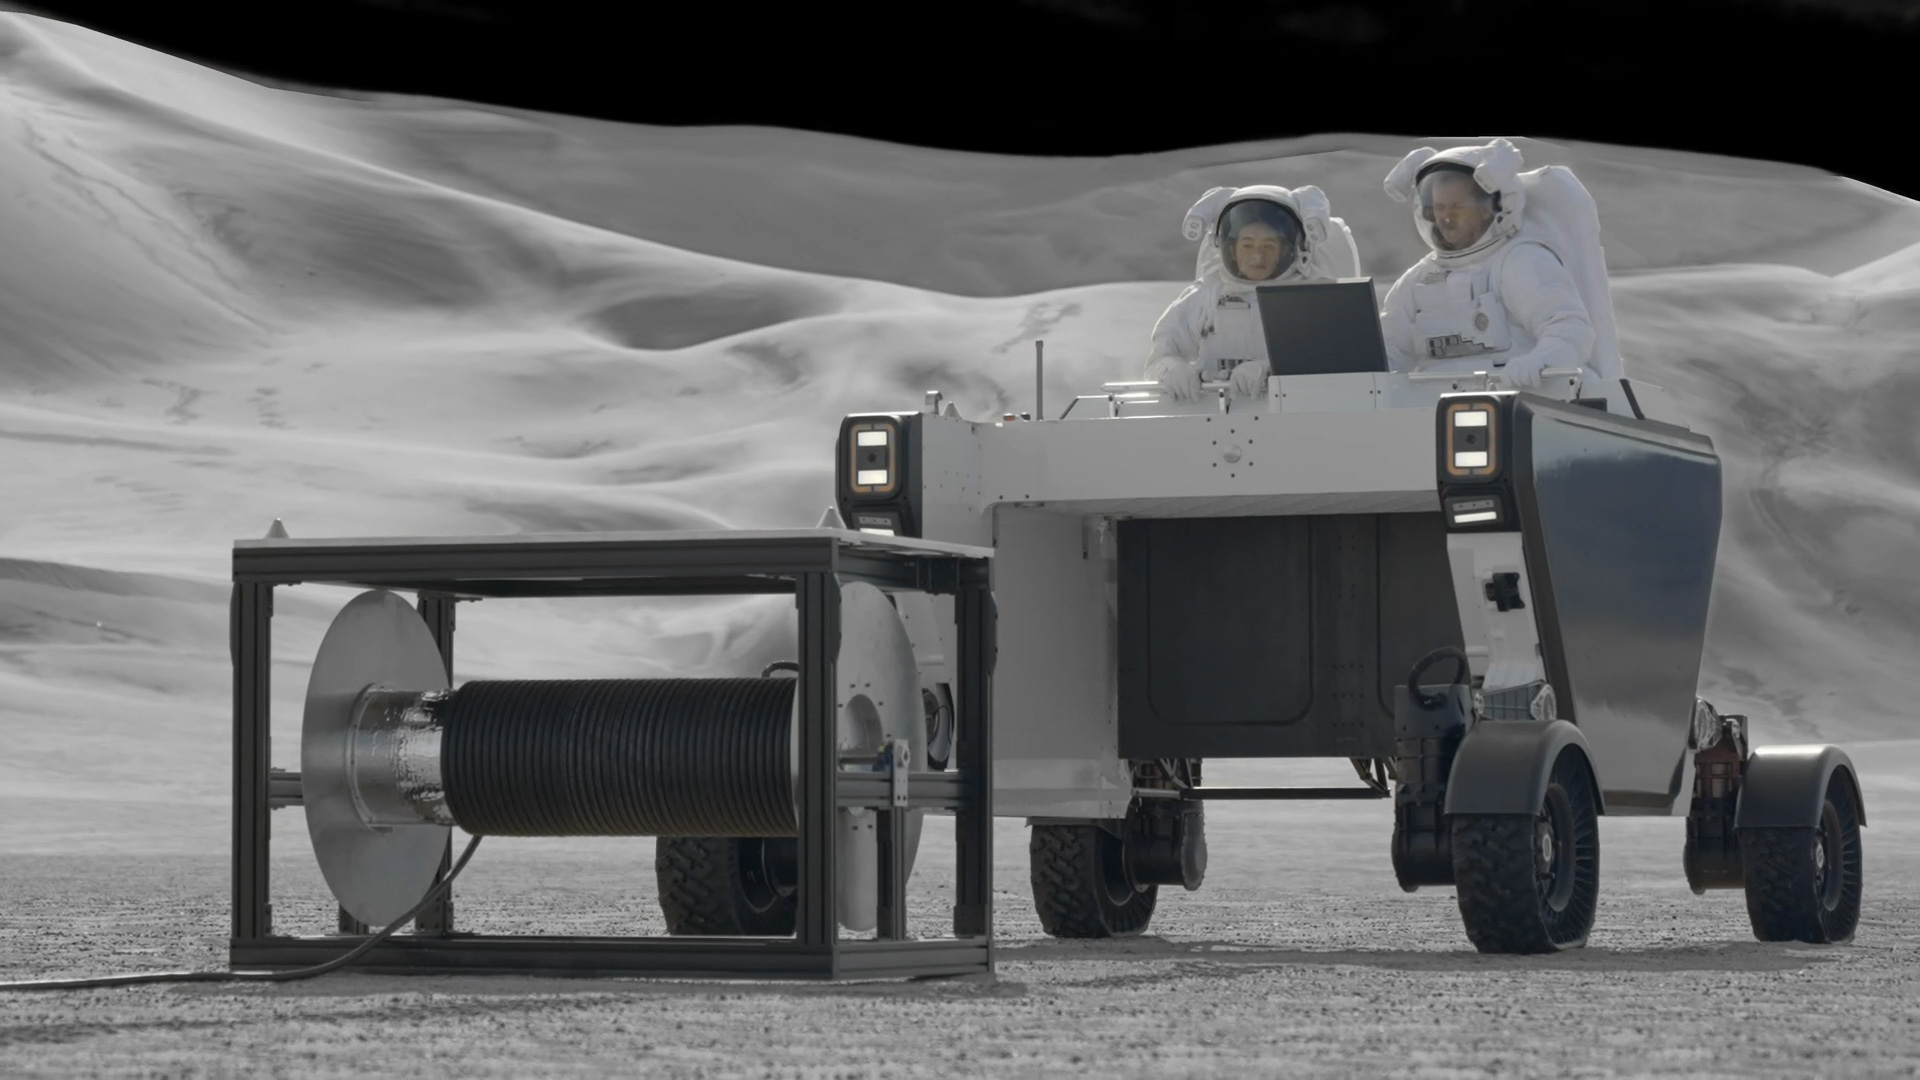 Video of Astrolab FLEX Rover during testing near Death Valley, Calif.